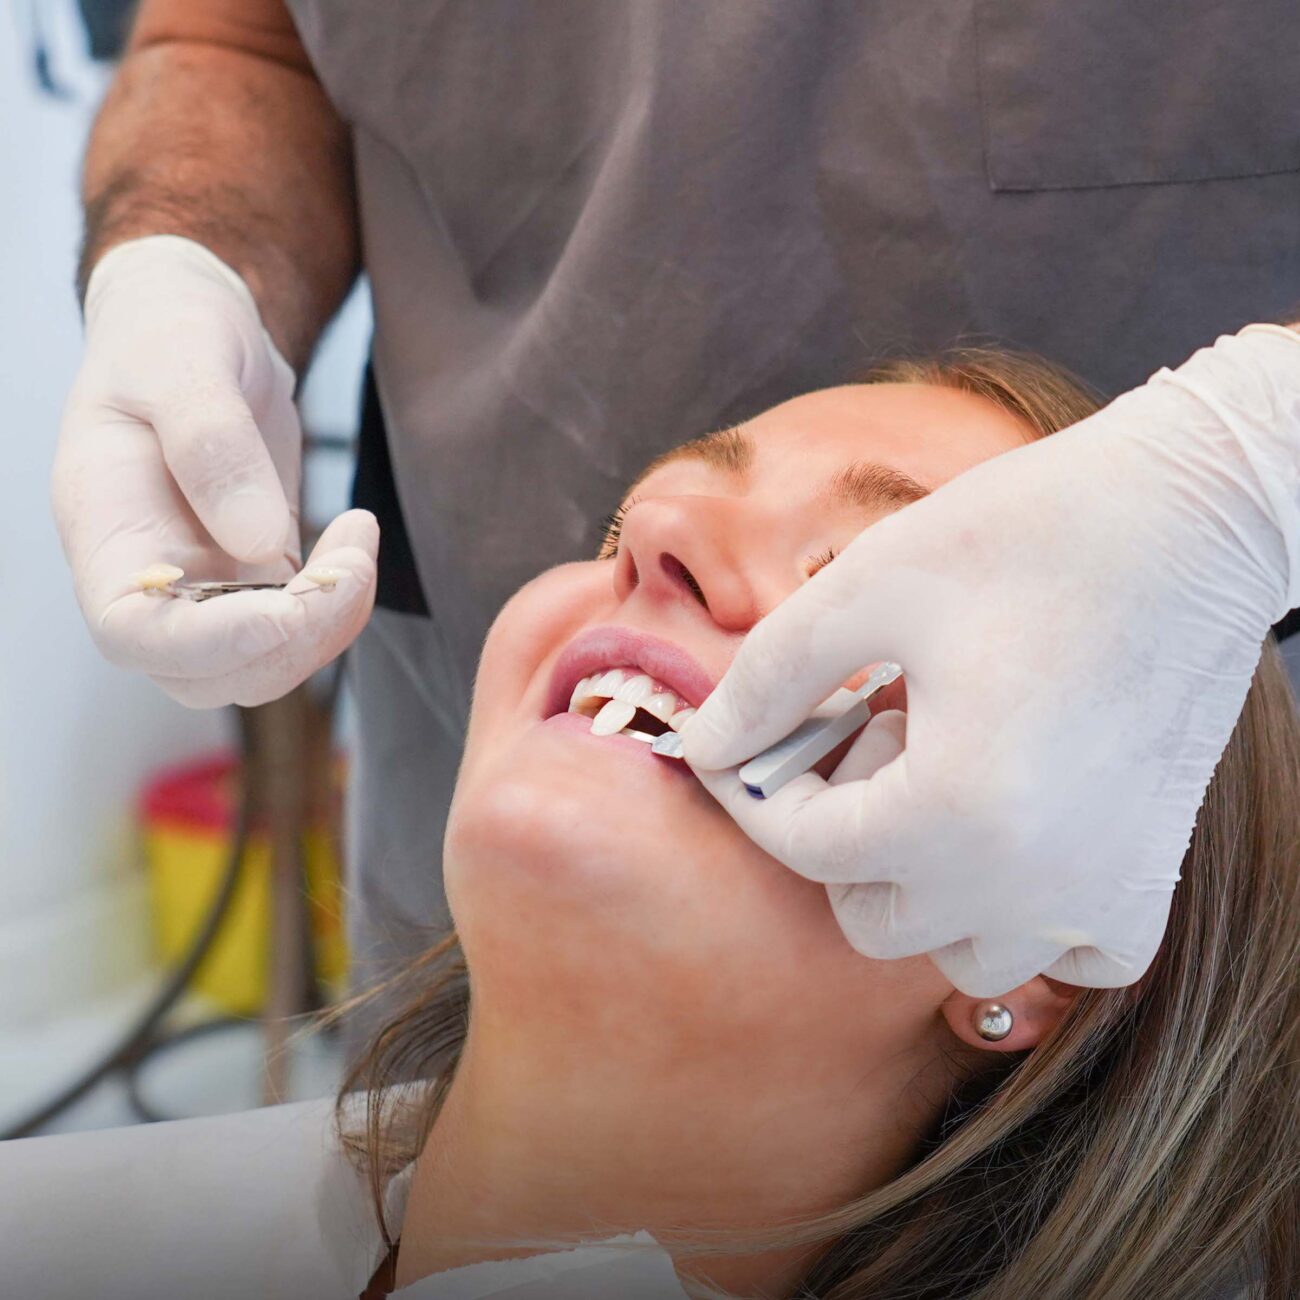 The first question many people ask about cosmetic procedures: how much do dental veneers cost in Turkey compared with the UK, Germany, and the US..